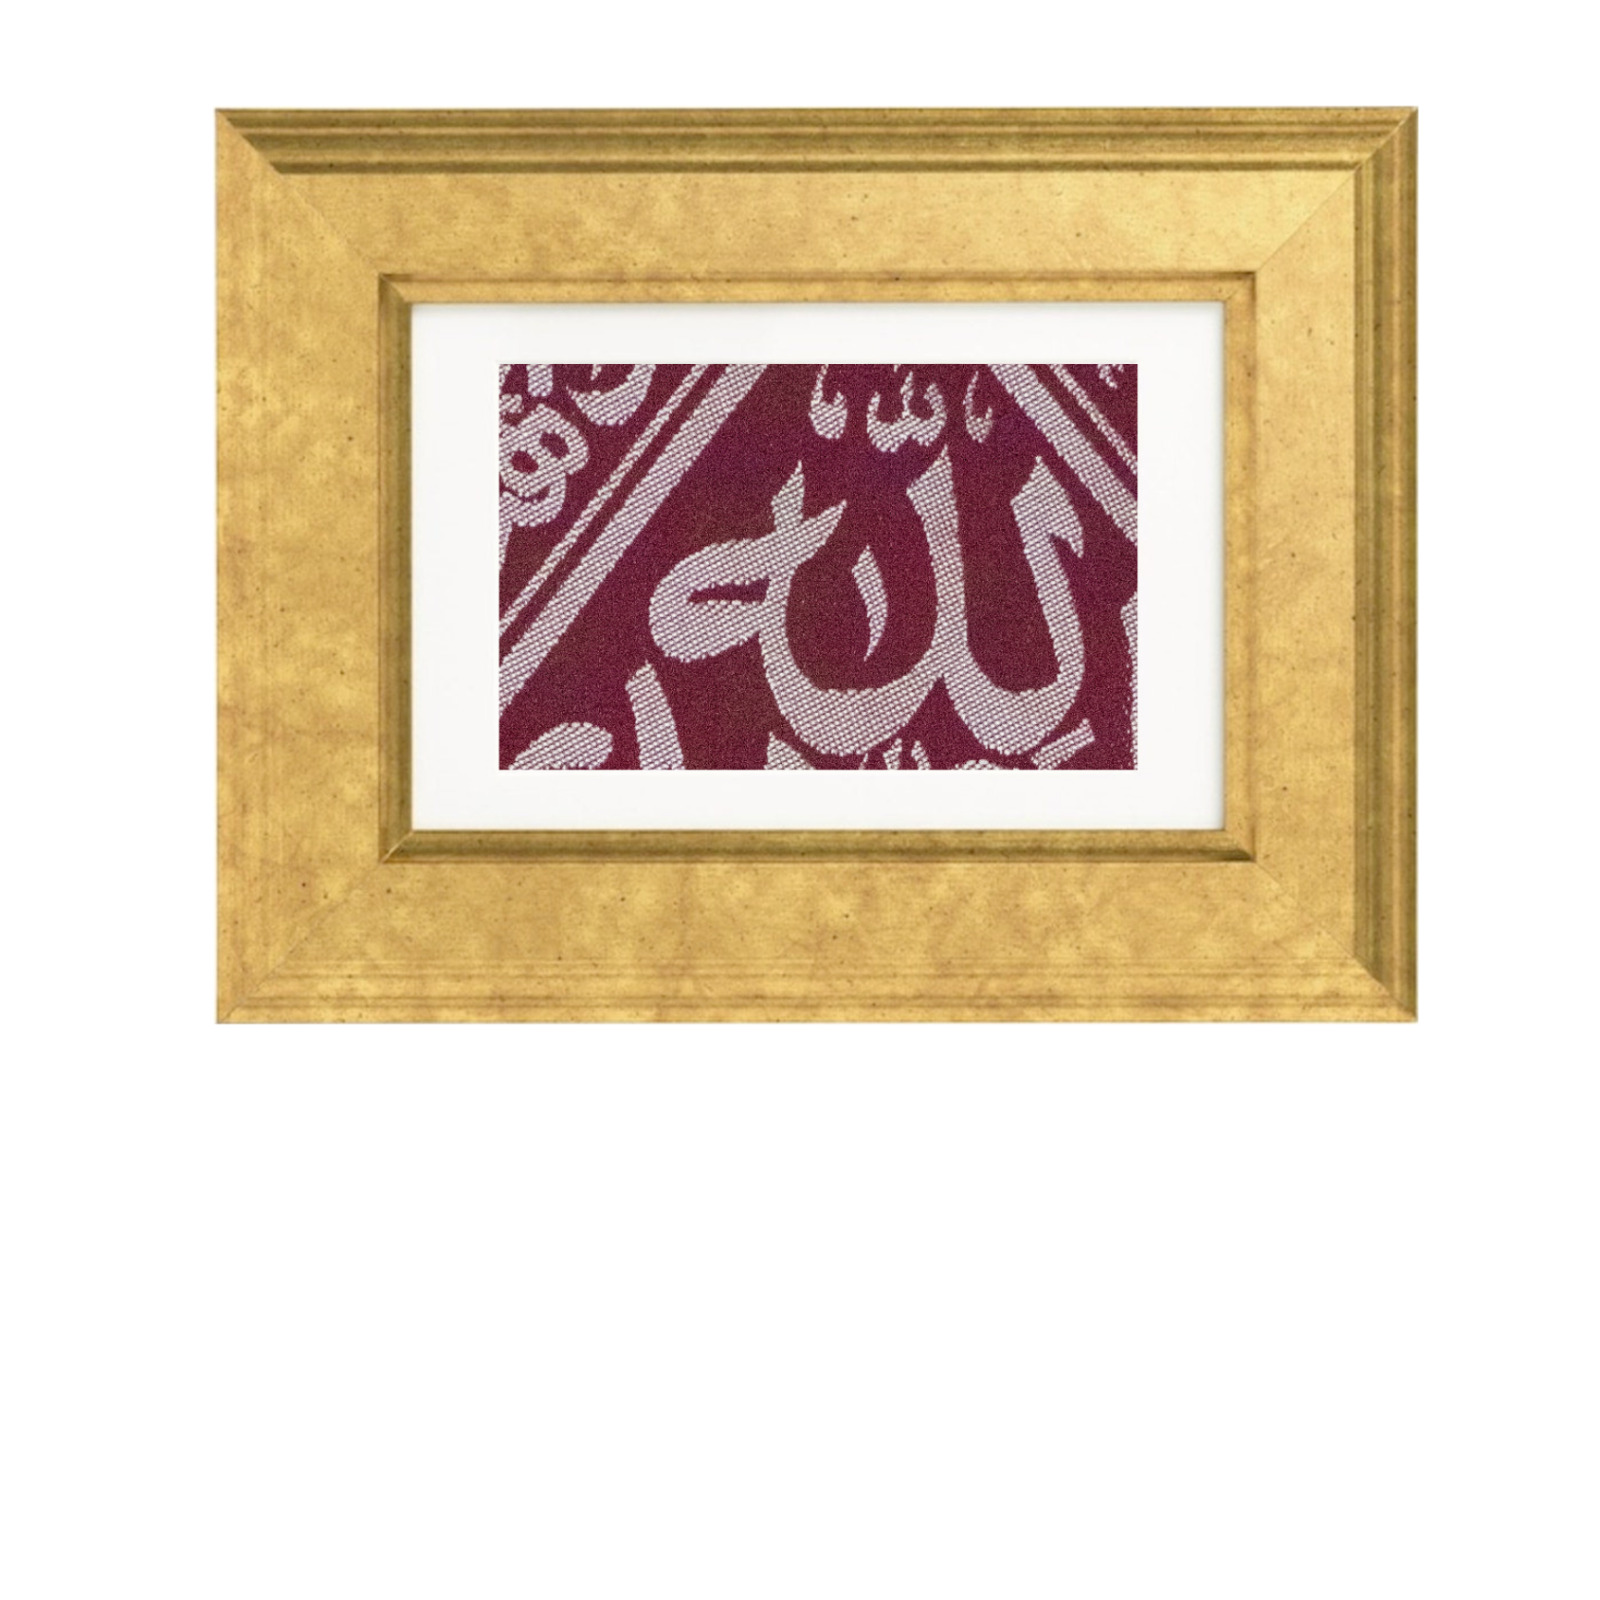 Certified By SaudiArabia Government Vintage Wood Frame Inside Red Cover Of Kaaba